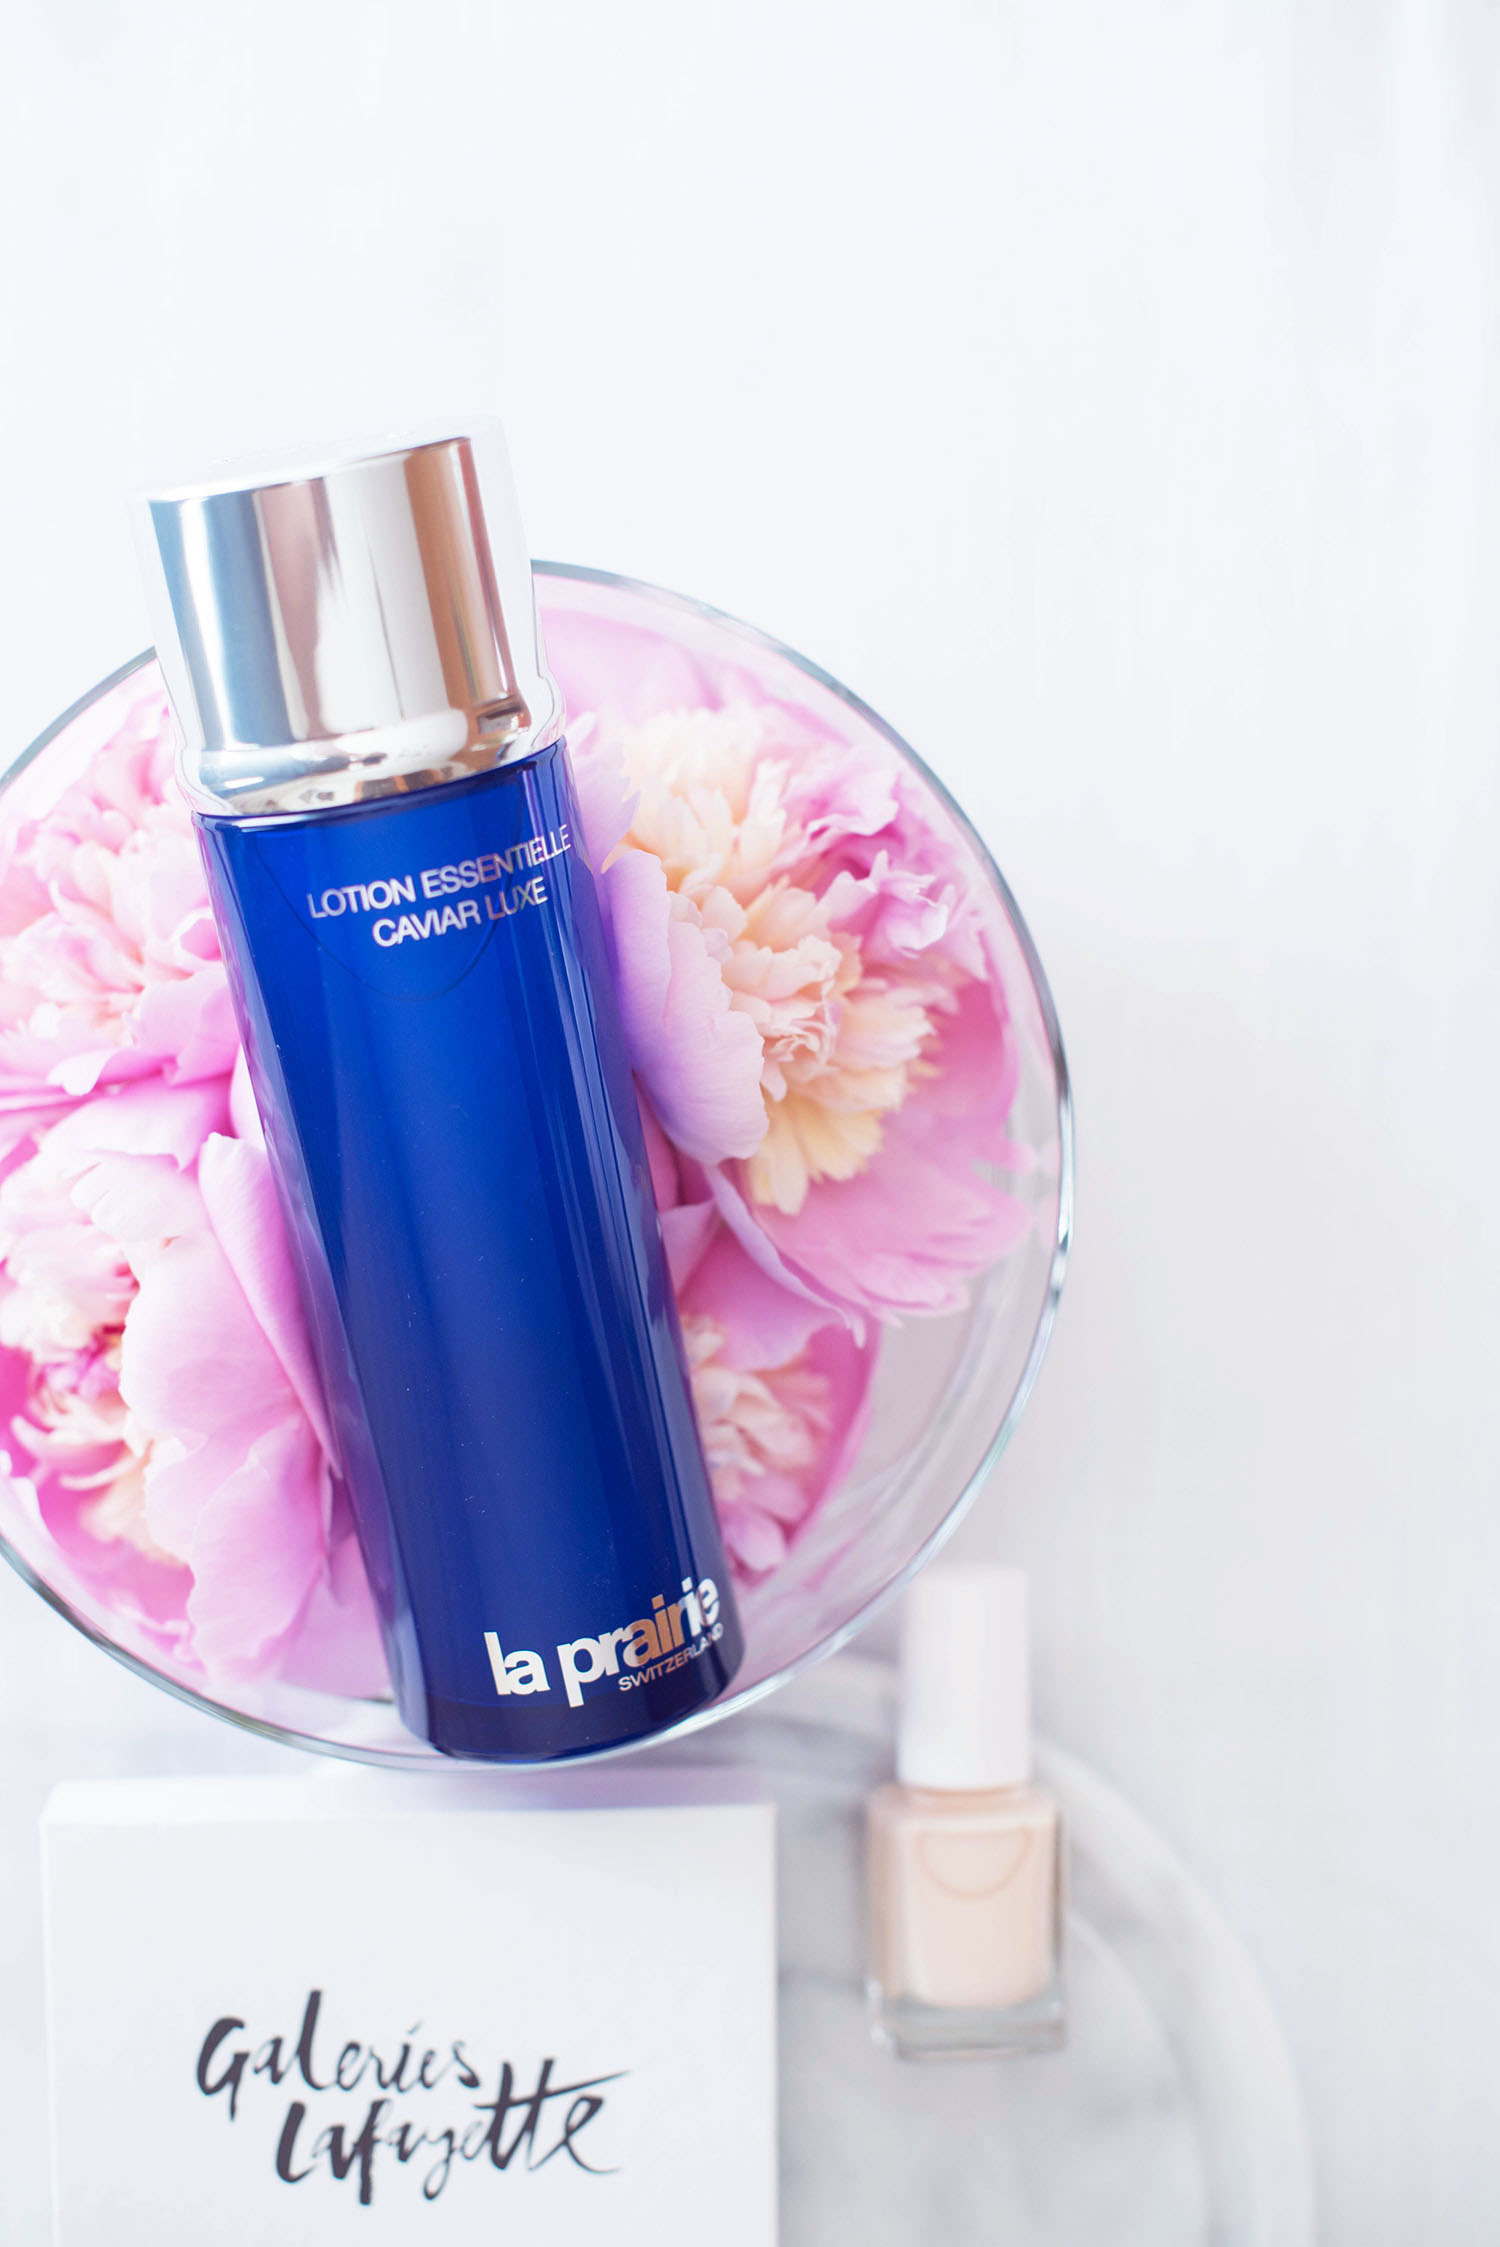 La Prairie skin caviar essence in lotion in a bowl of peonies, captured by beauty blogger Cee Fardoe of Coco & Vera